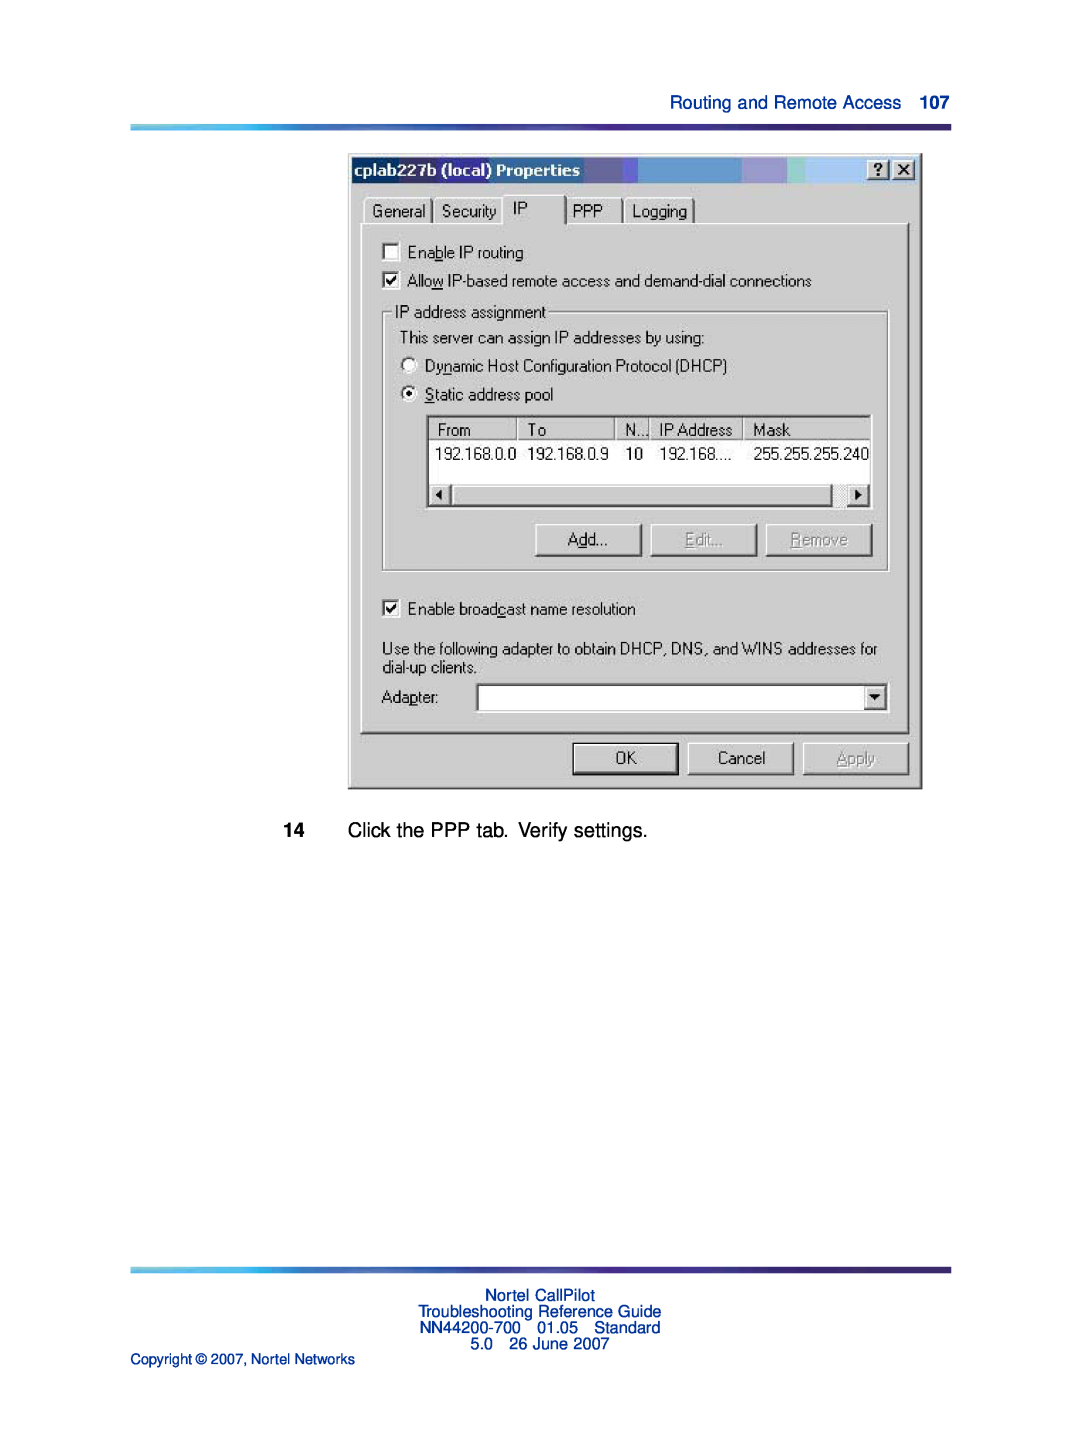 Nortel Networks NN44200-700 Click the PPP tab. Verify settings, Routing and Remote Access, Copyright 2007, Nortel Networks 